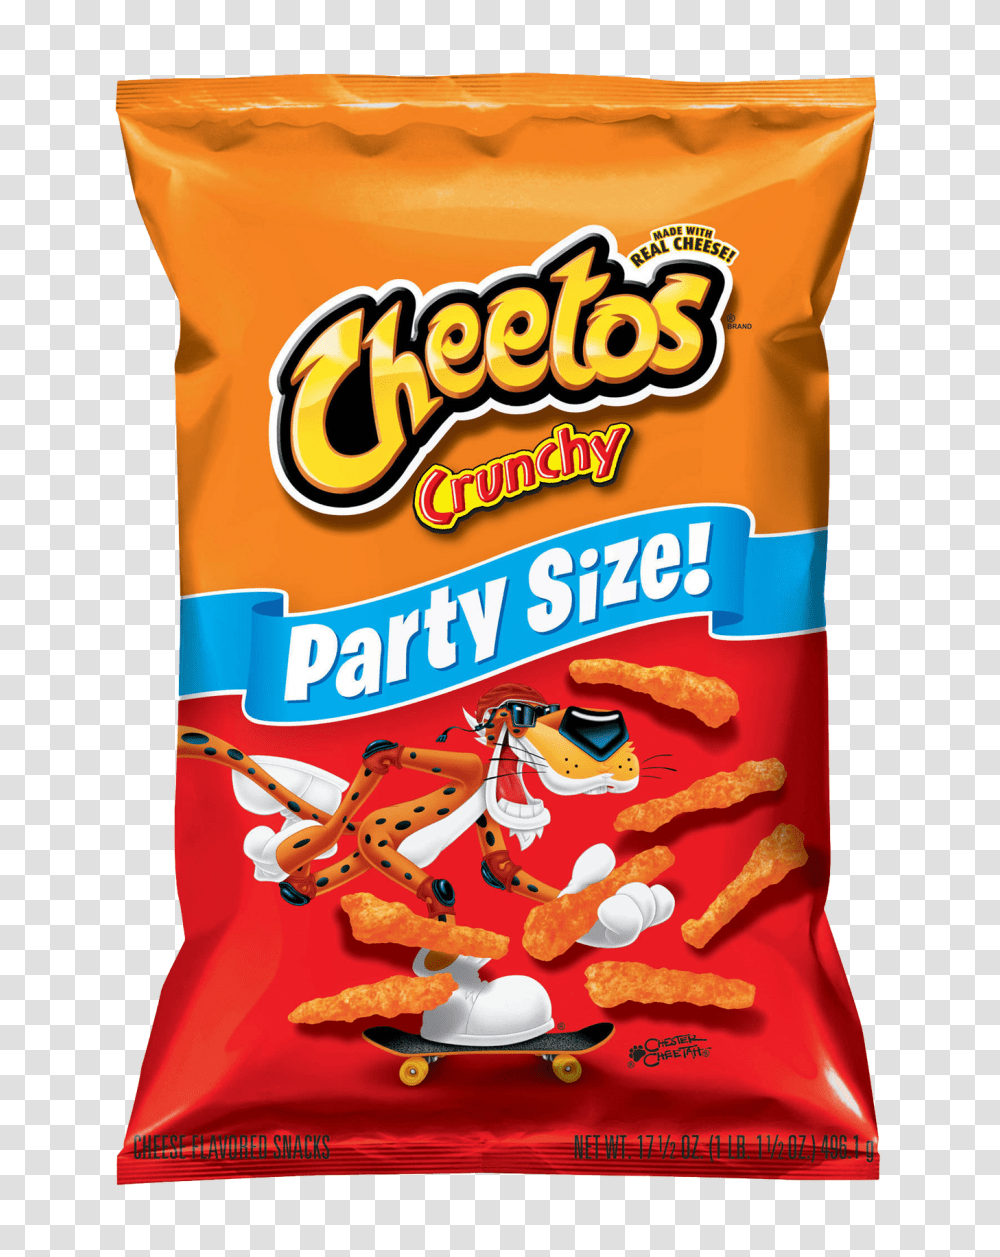 Cheetos Crunchy Pack Image, Food, Snack, Sweets, Confectionery Transparent Png